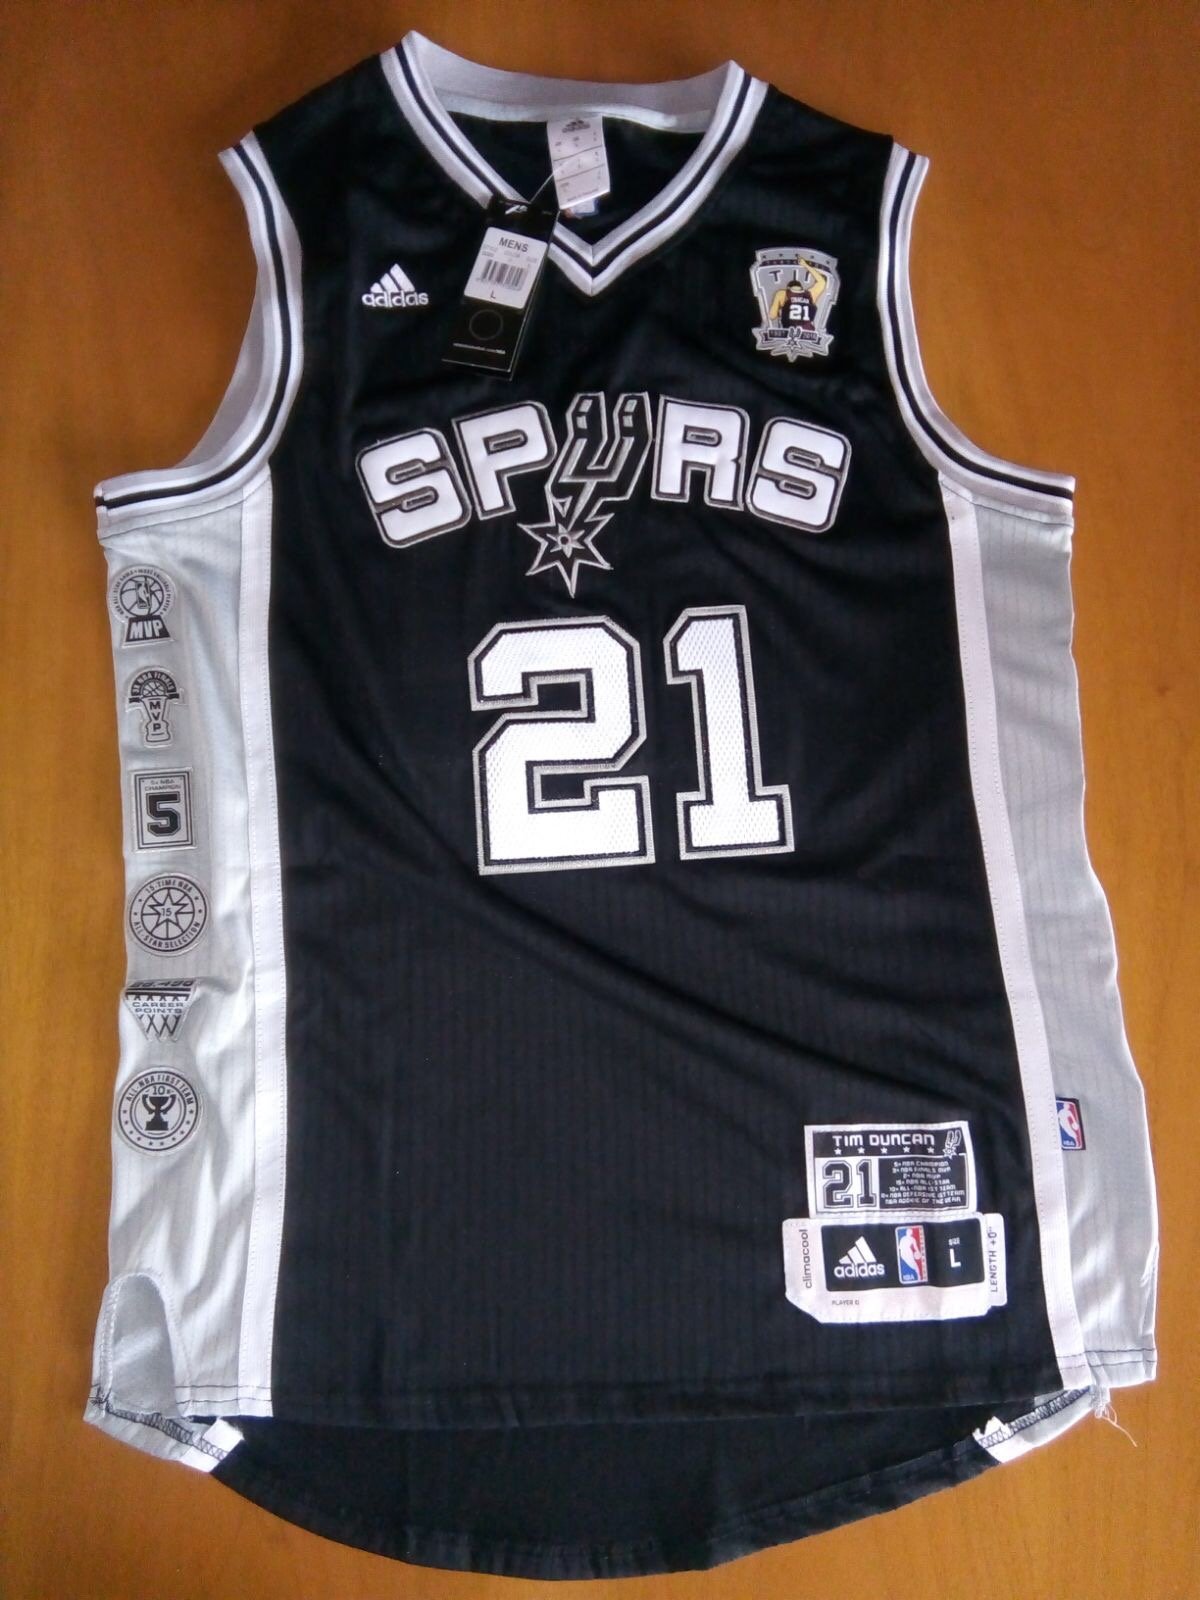 Tim Duncan Retirement Jersey by Adidas 